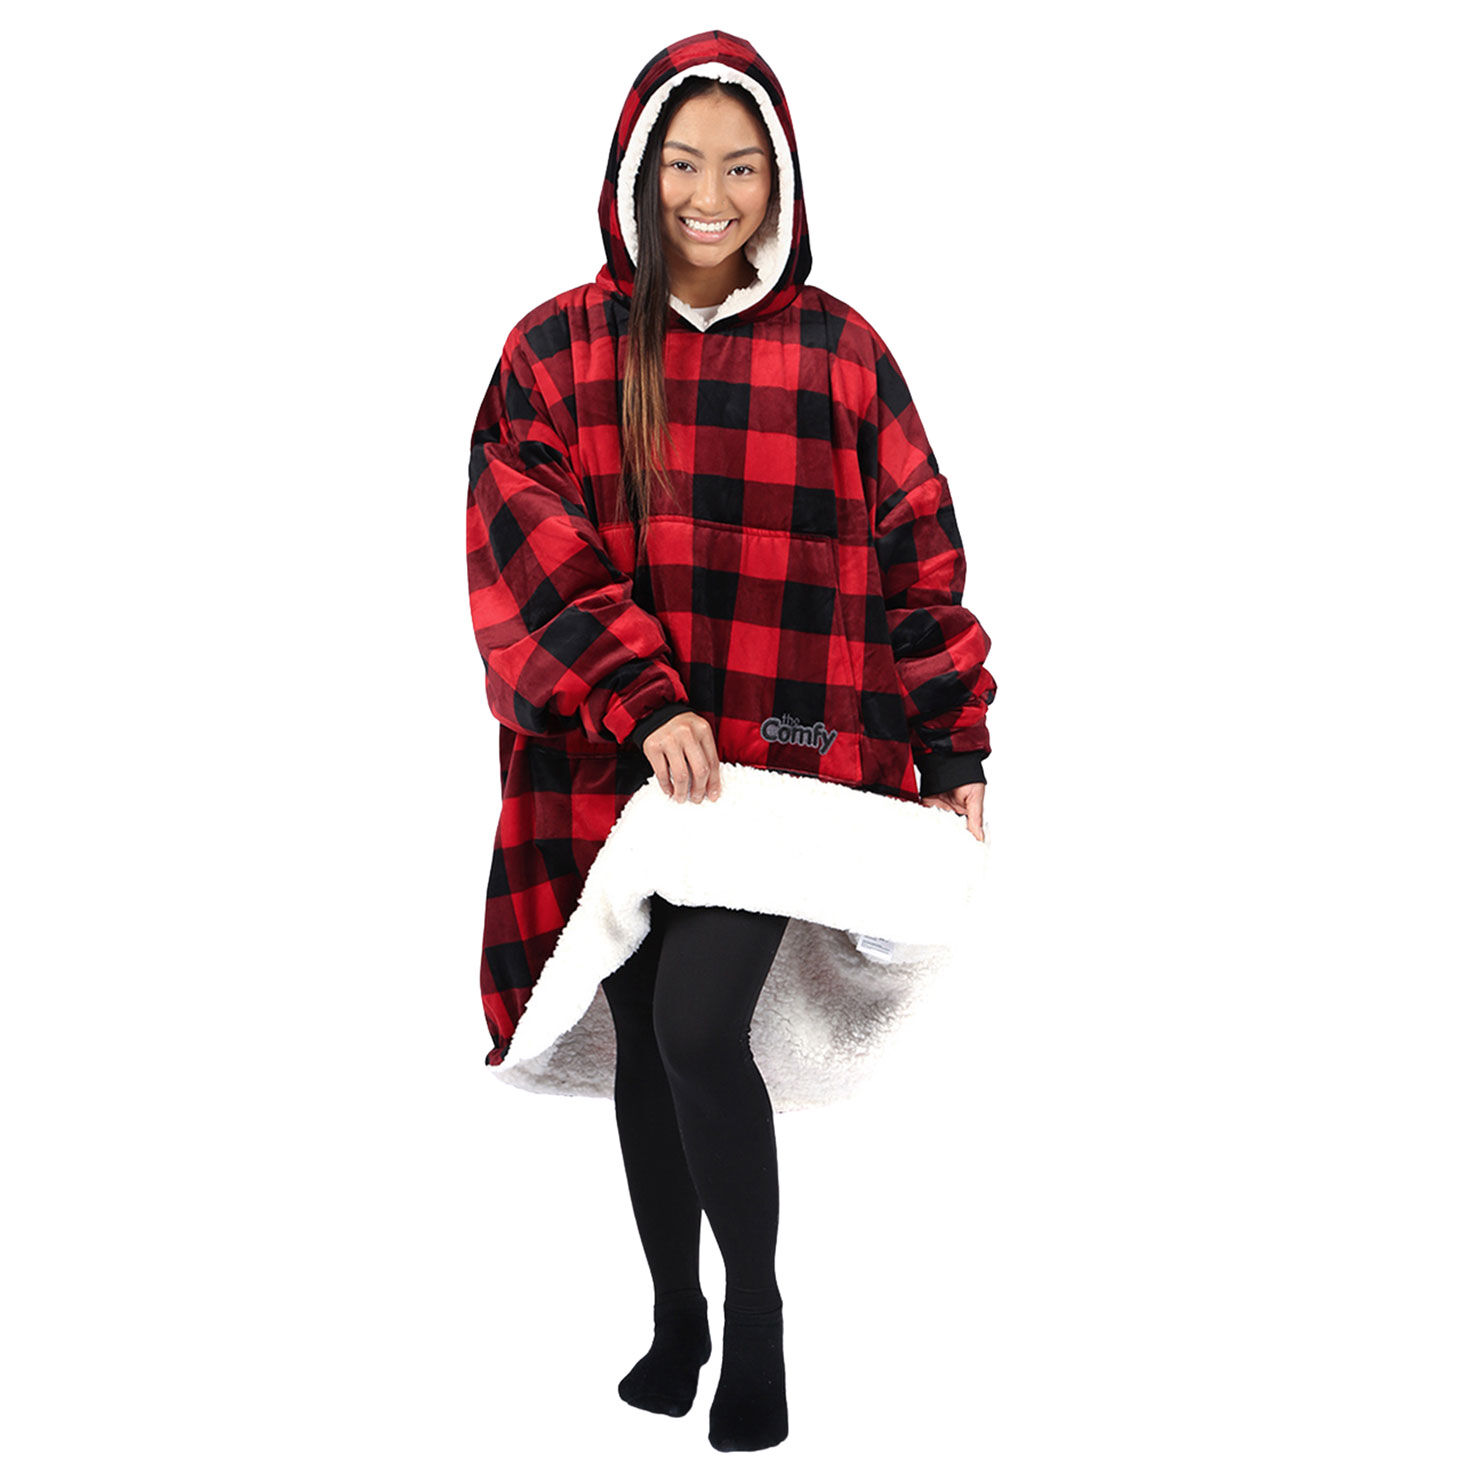 The Comfy Original Wearable Blanket in Red Plaid for only USD 49.99 | Hallmark